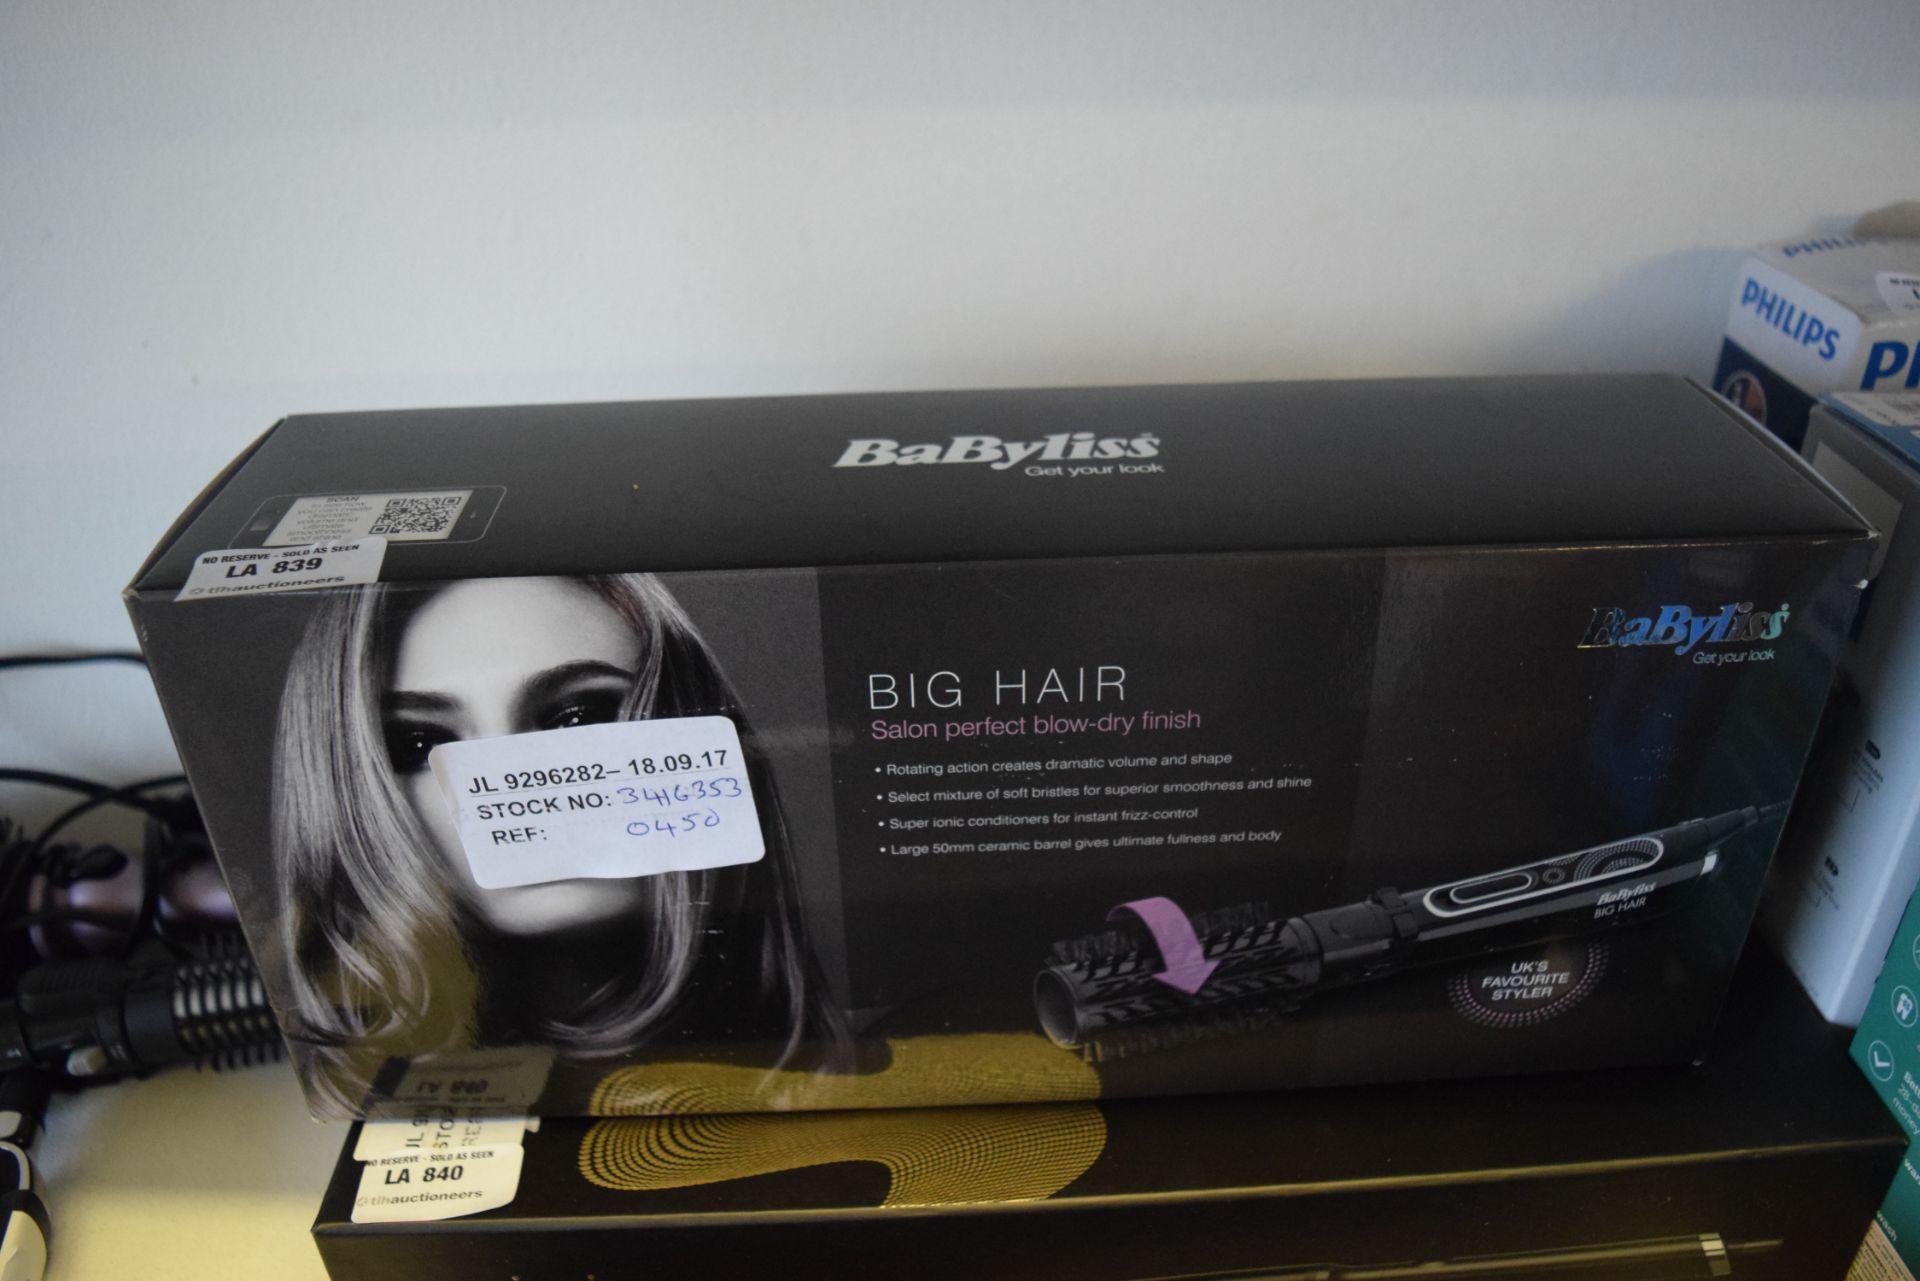 1 x BOXED BABYLISS BIG HAIR HAIR STYLER RRP £45 18/09/17 *PLEASE NOTE THAT THE BID PRICE IS